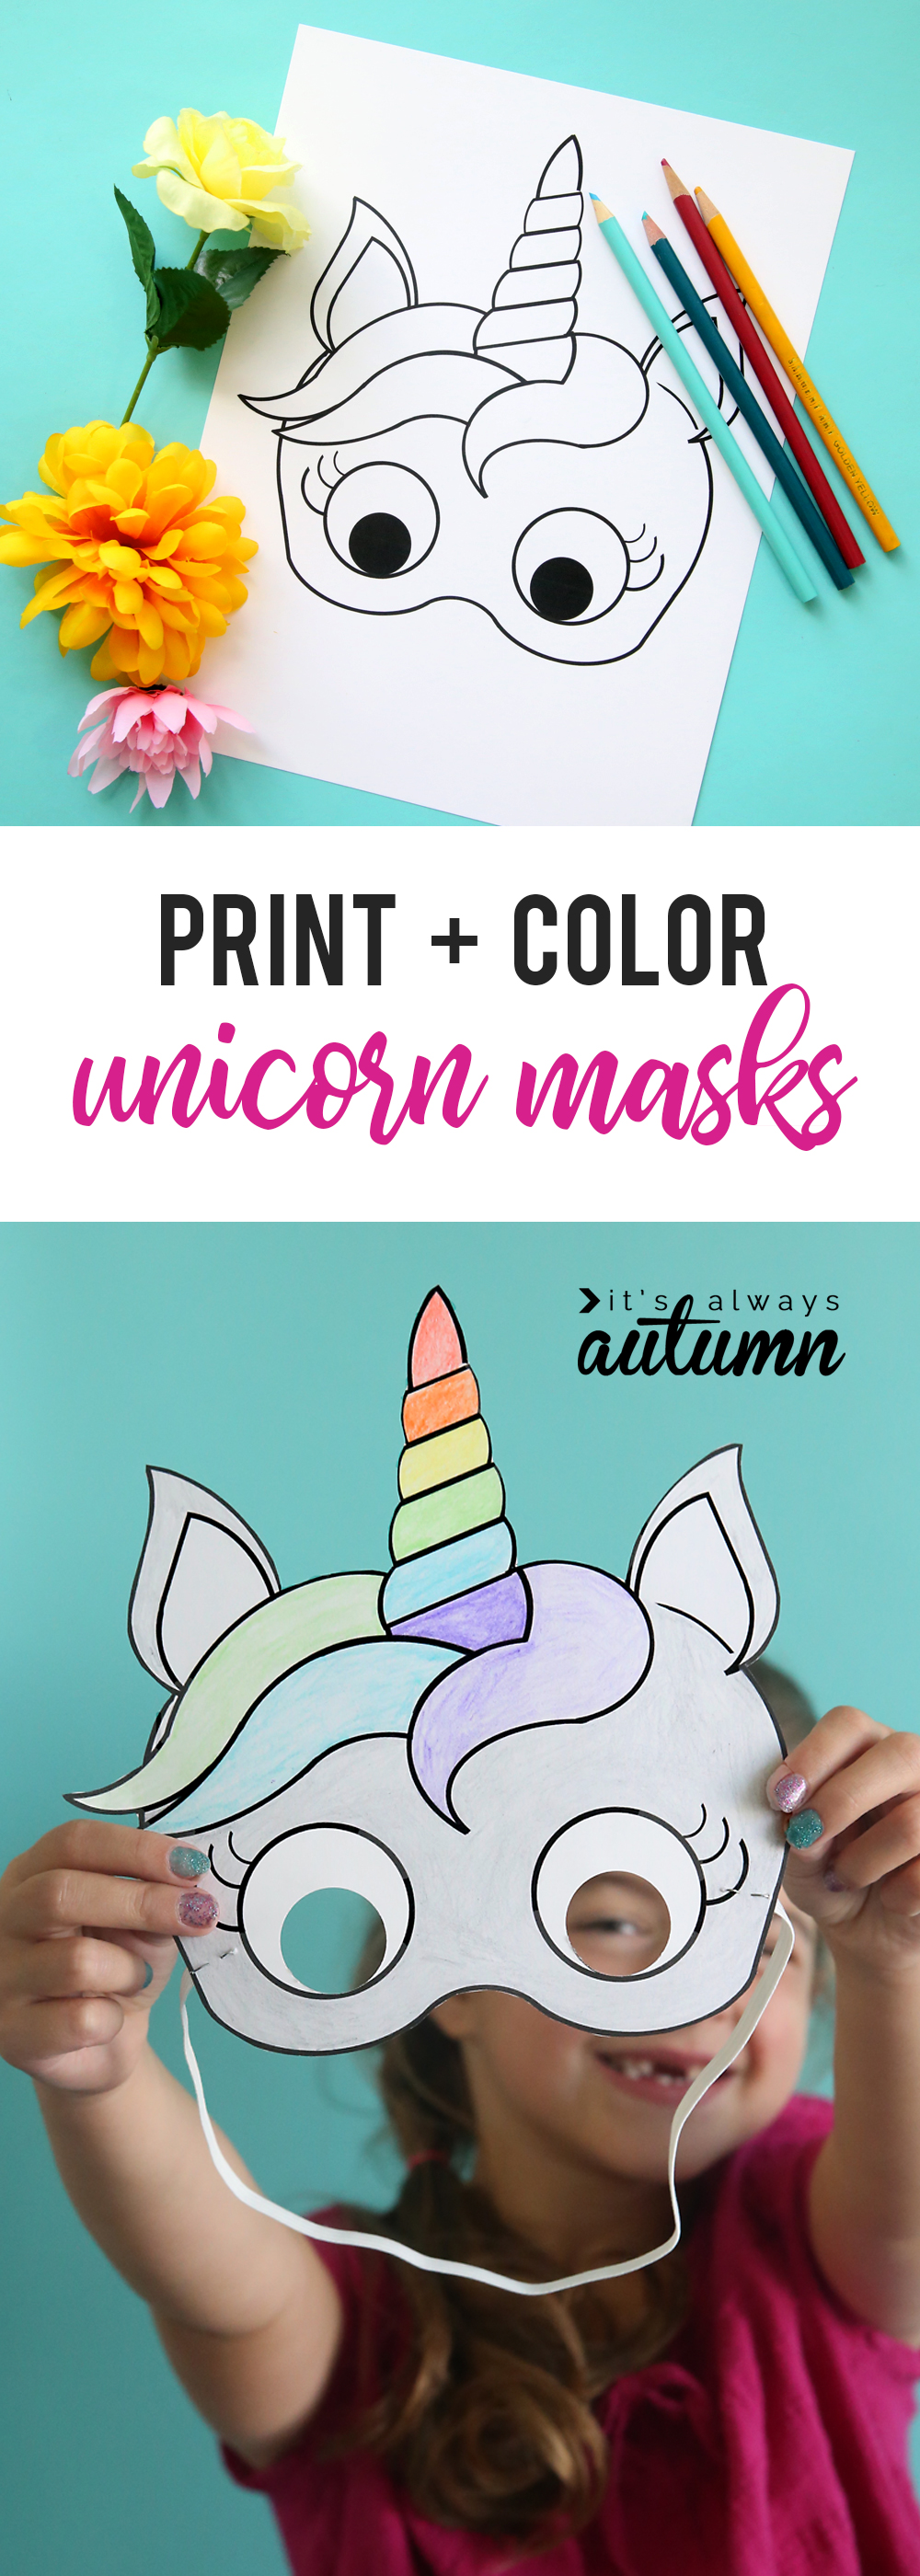 DIY halloween mask in the shape of a unicorn